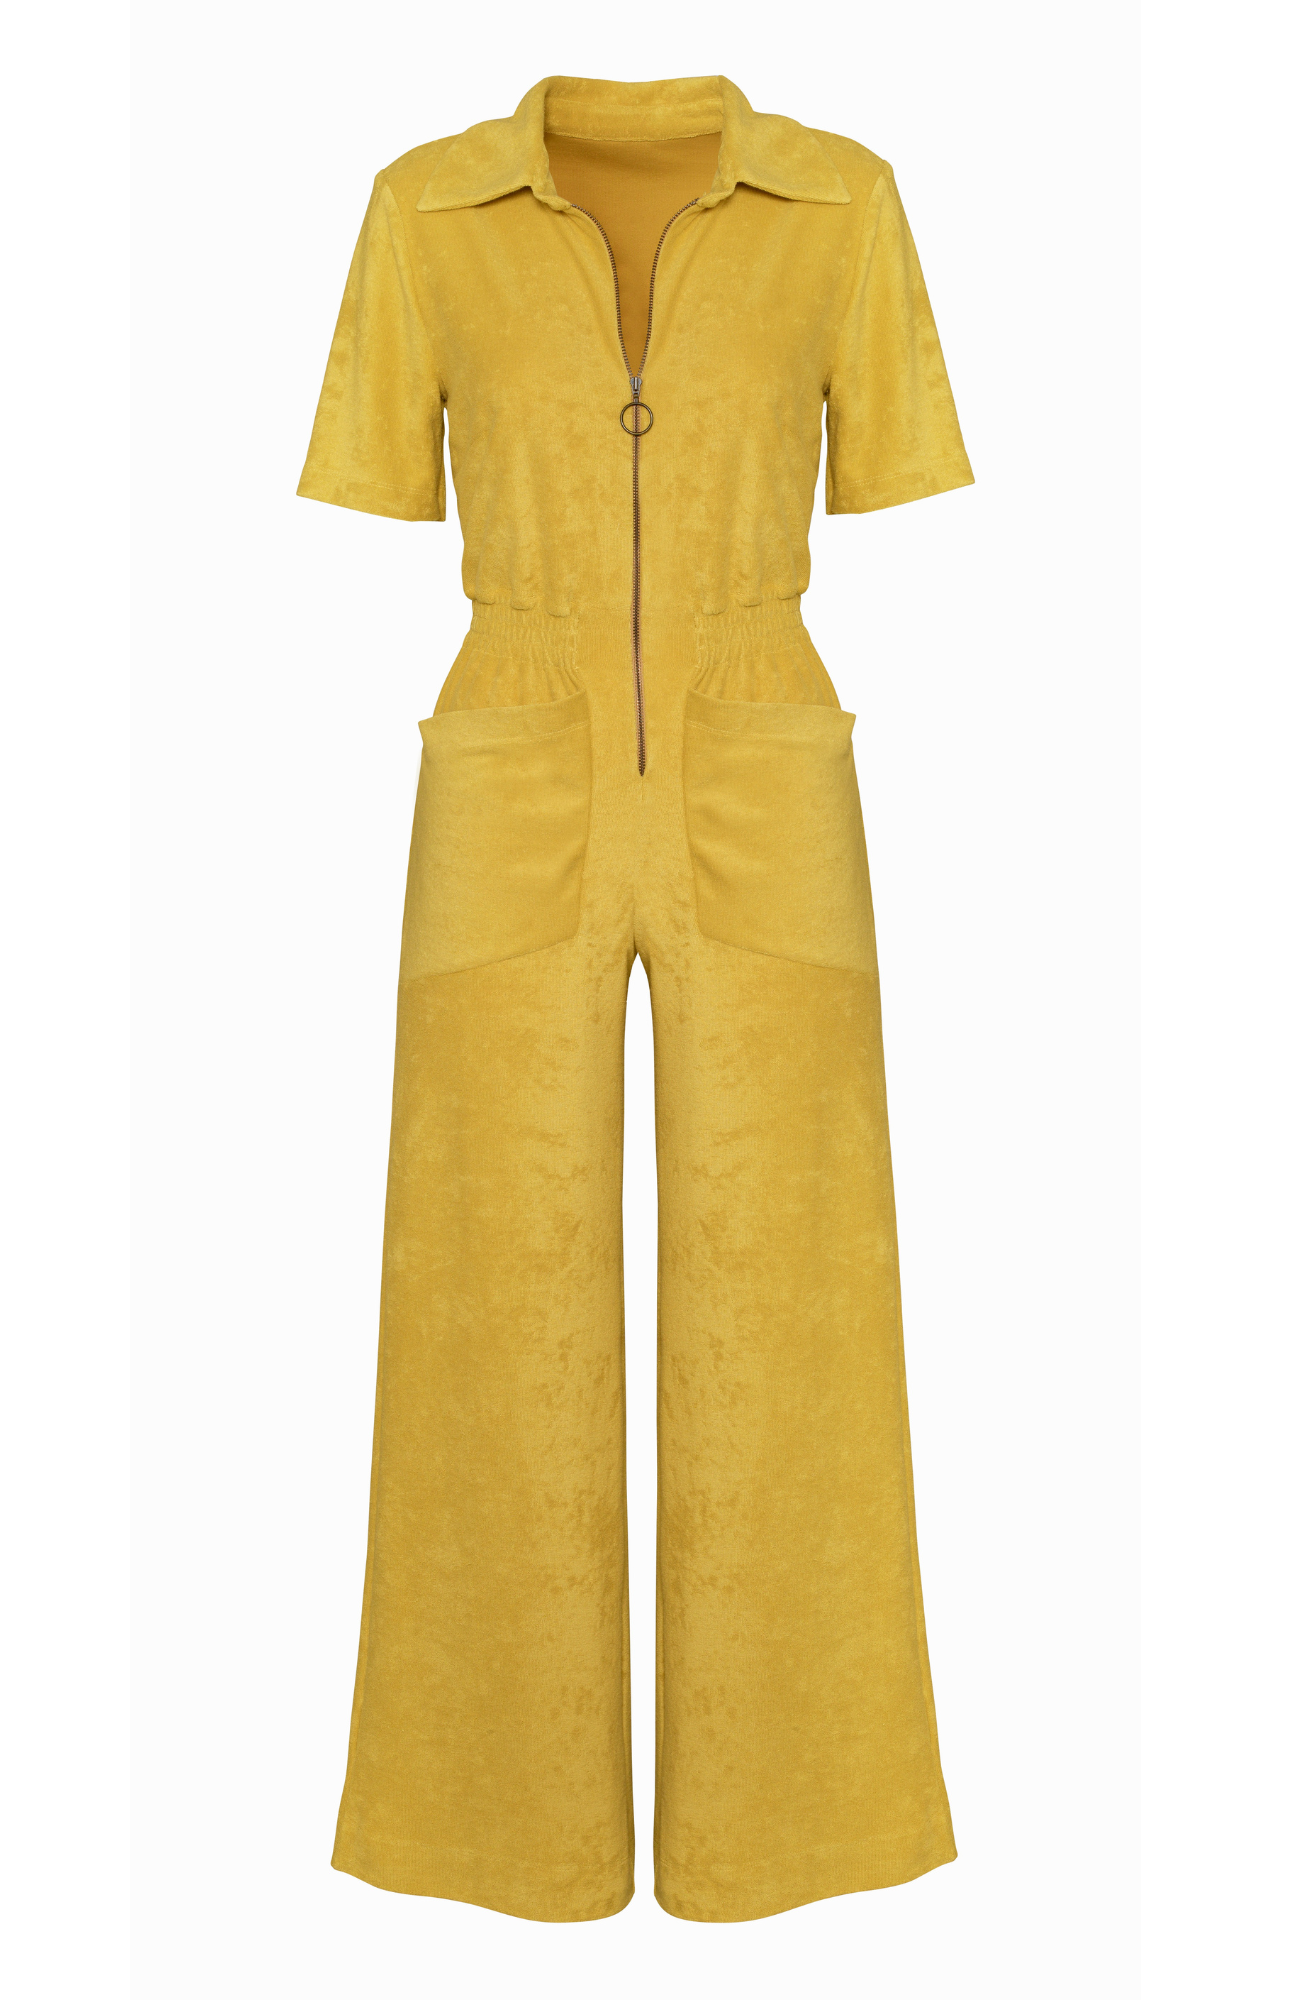 ISLA in Terry Towelling - Rock the Jumpsuit